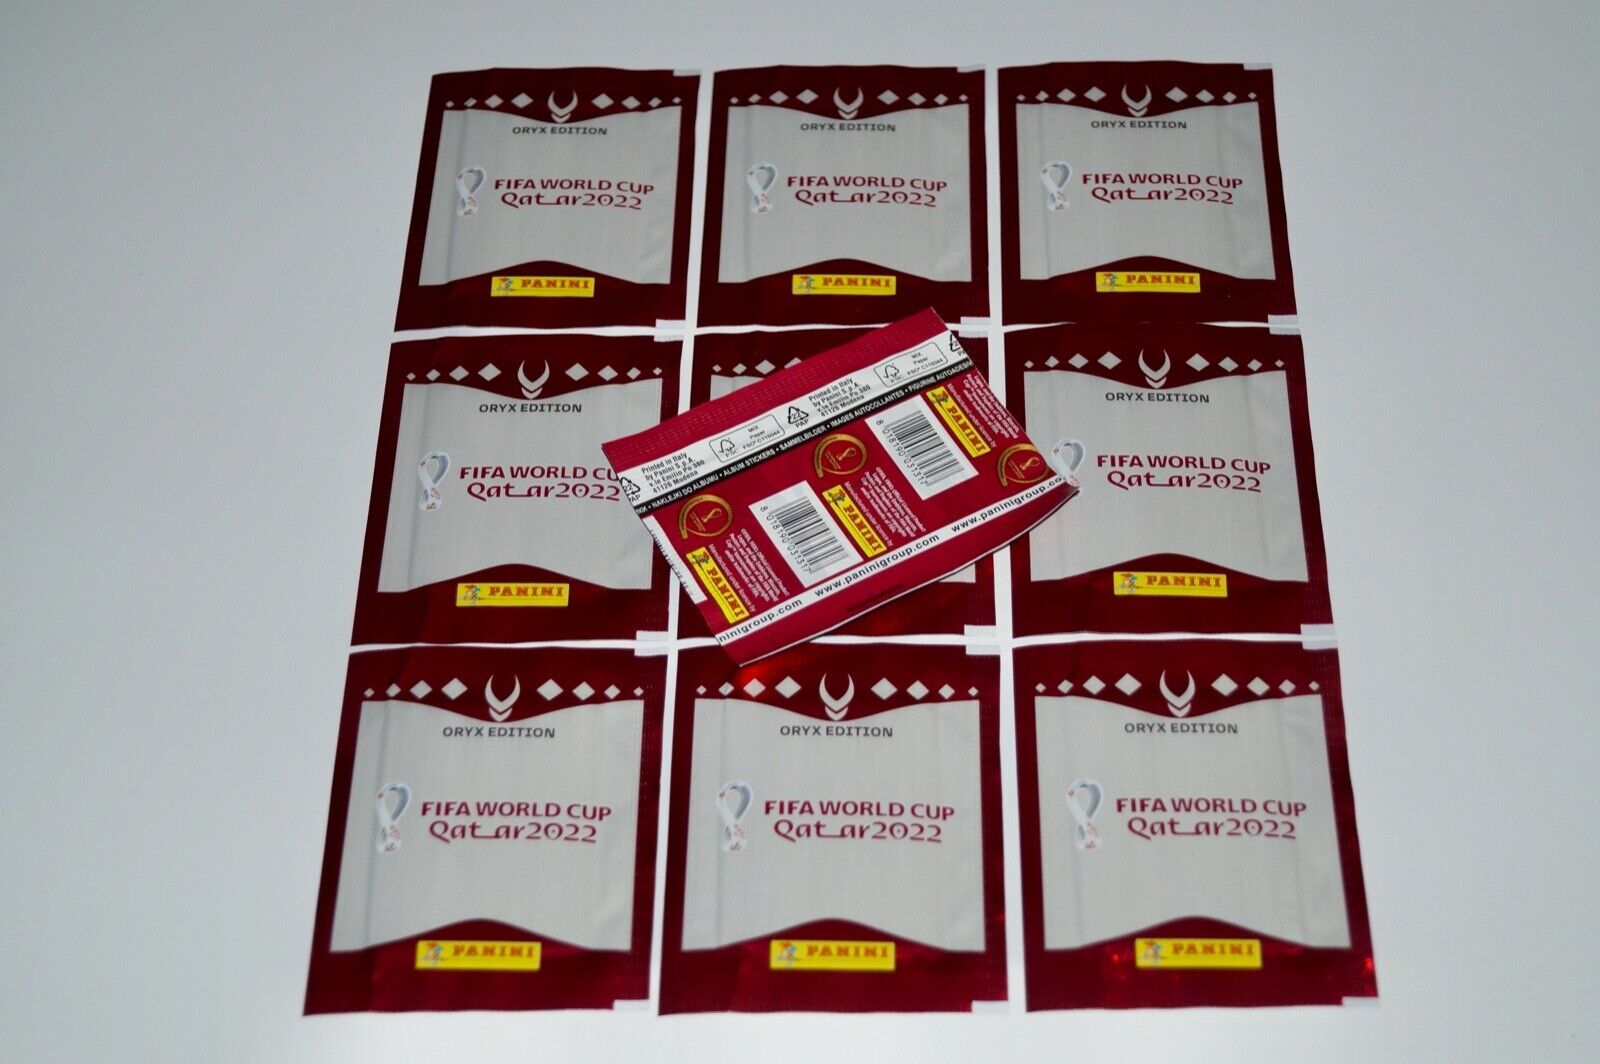 PANINI World Cup Qatar 2022 - Swiss ORYX Edition 10 sealed packs IN STOCK NOW